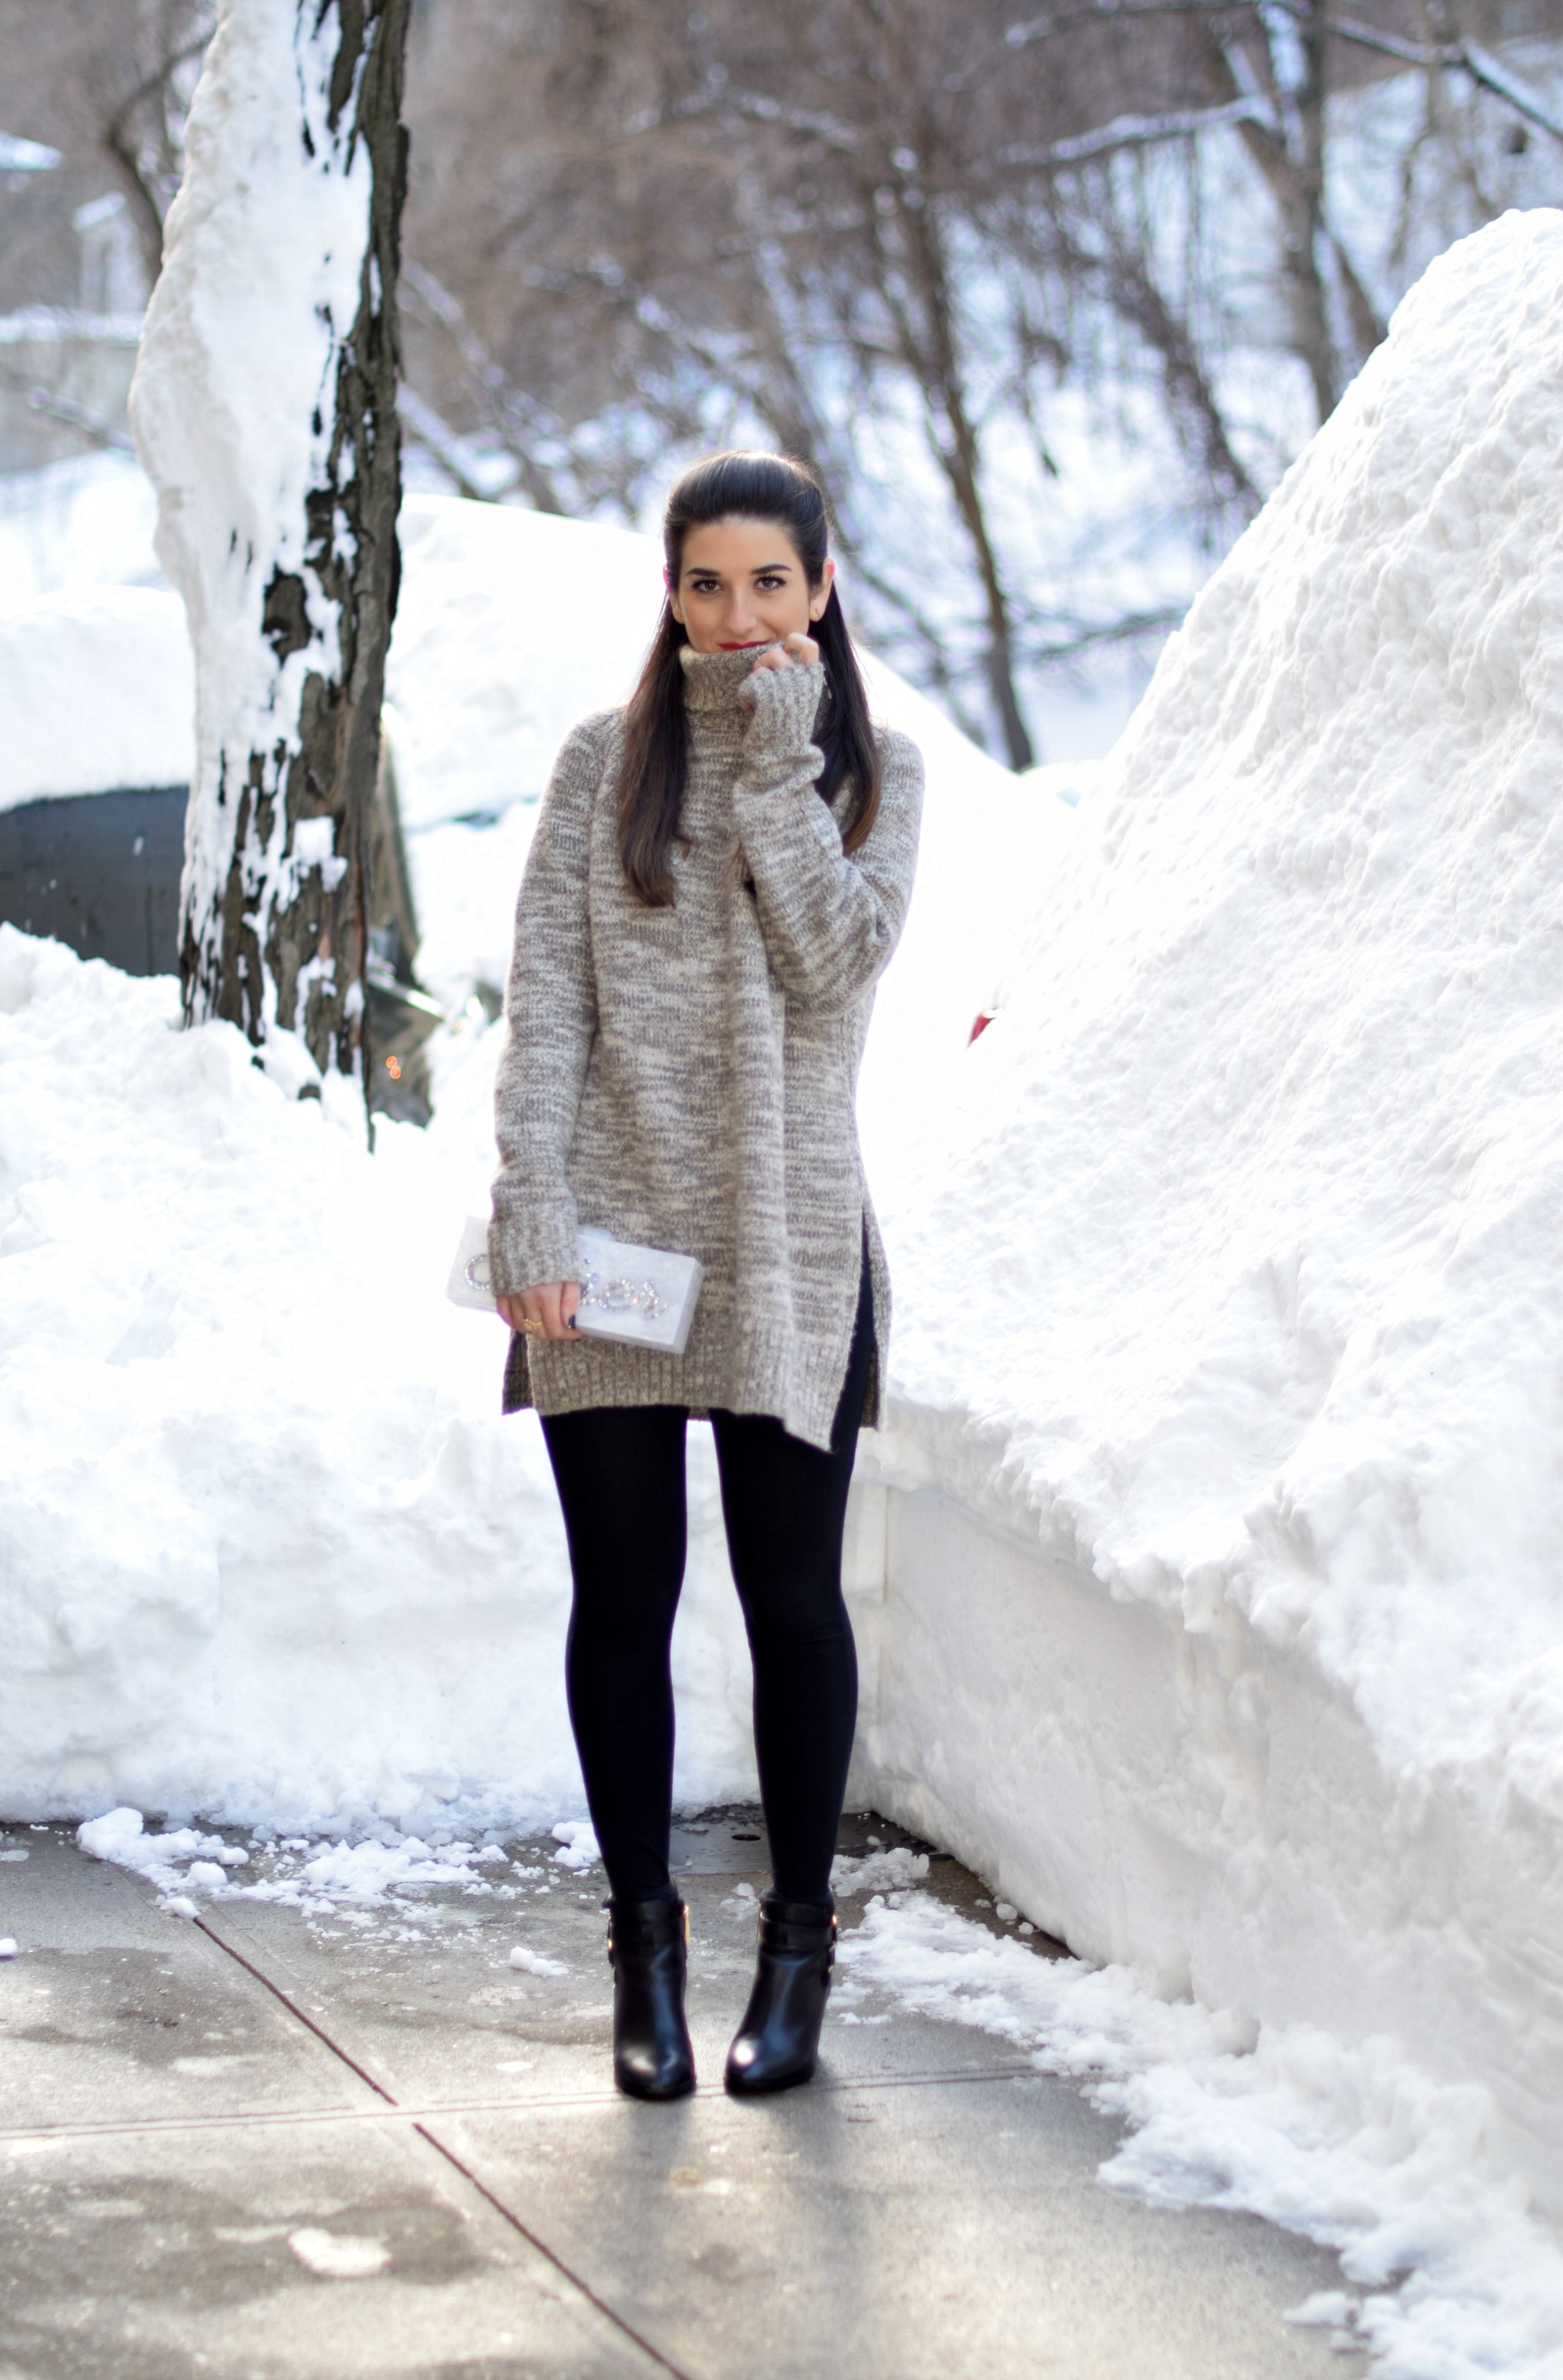 Grey Turtleneck Leggings Louboutins & Love Fashion Blog Esther Santer NYC Street Style Blogger Oversized Sweater Outfit Idea OOTD Black Booties Girl Swag Women Chic What To Wear Shop Monogram Clutch Inspo Hair Photoshoot NYC Blizzard Jonas Snow Winter.jpg